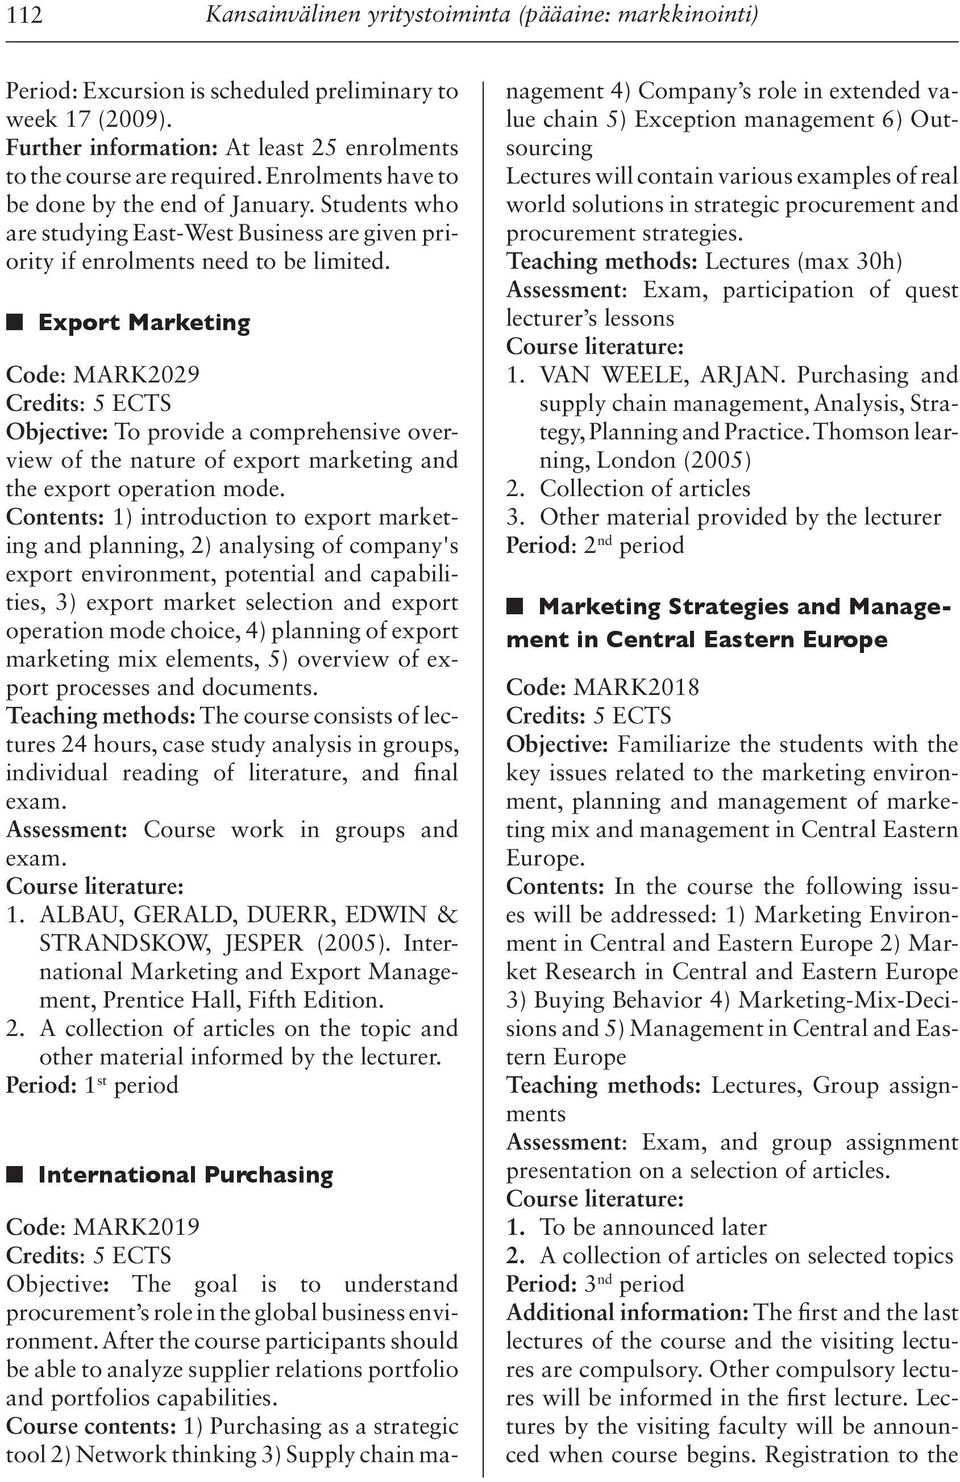 n Export Marketing Code: MARK2029 Objective: To provide a comprehensive overview of the nature of export marketing and the export operation mode.